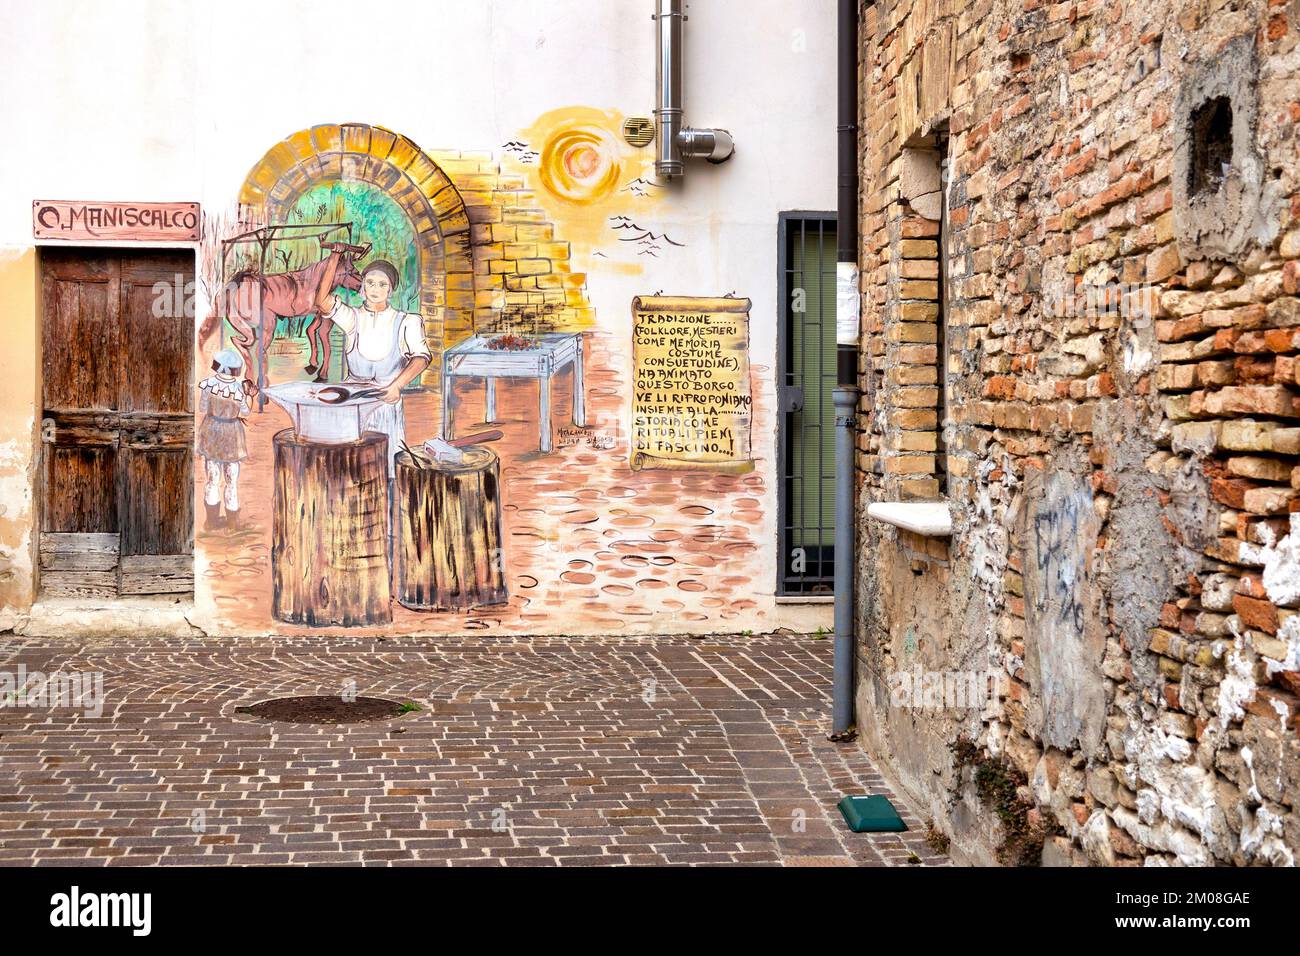 Murals by the artist Mira Cancelli on the history of the village of Cepagatti, Italy Stock Photo